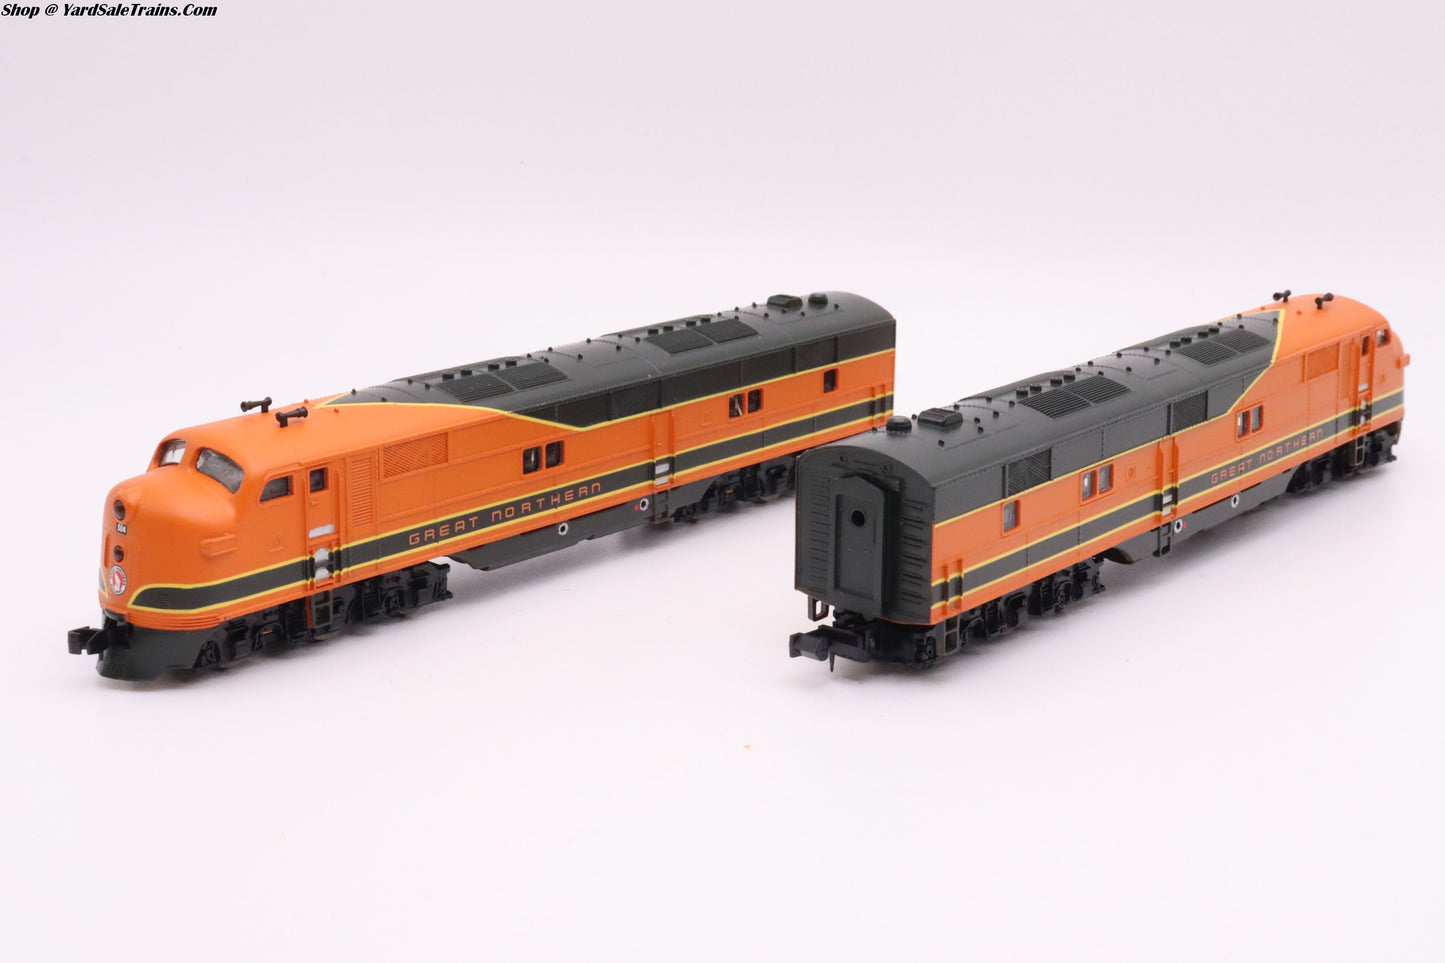 LL-7007 / LL-7008 - E7A / E7A Locomotive Set - Great Northern - GN # 504 / 500 - N Scale - Preowned